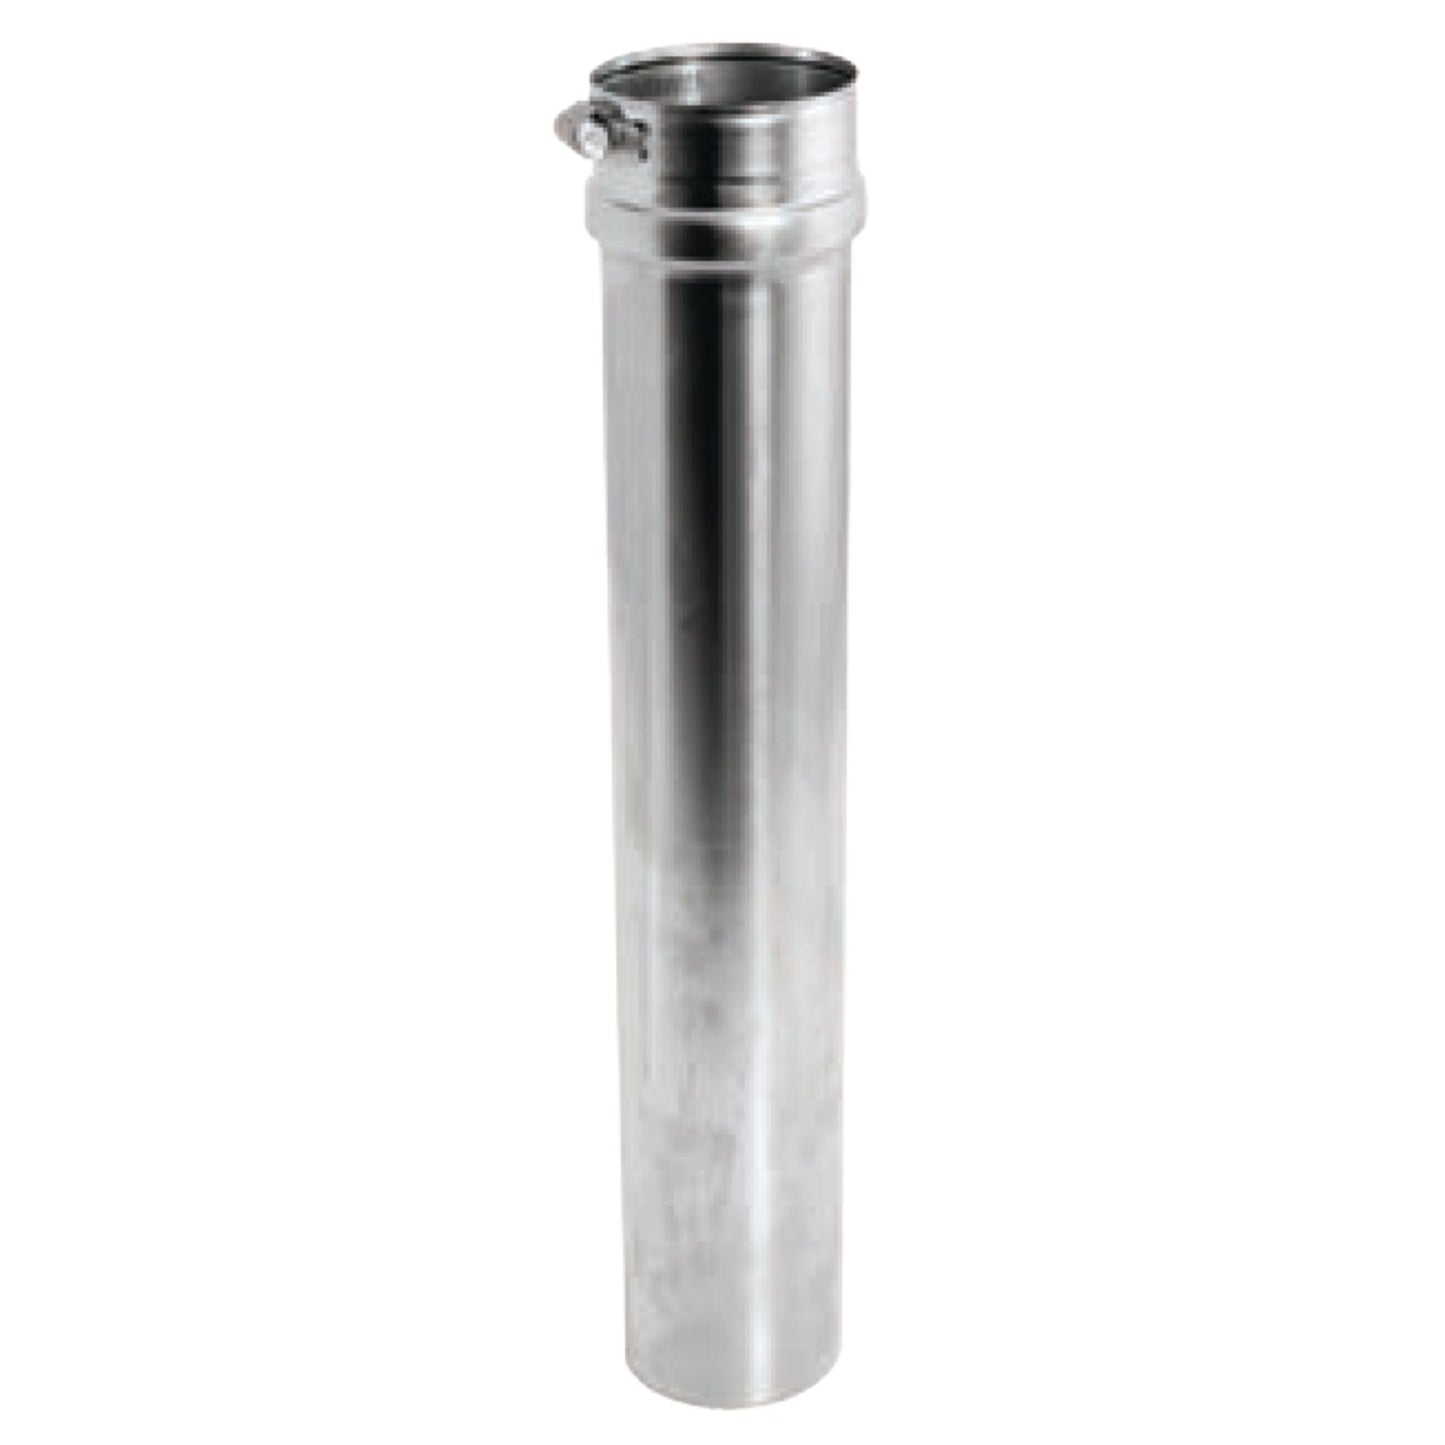 DuraVent FasNSeal 9" x 18" 29-4C Stainless Steel Adjustable Vent Length